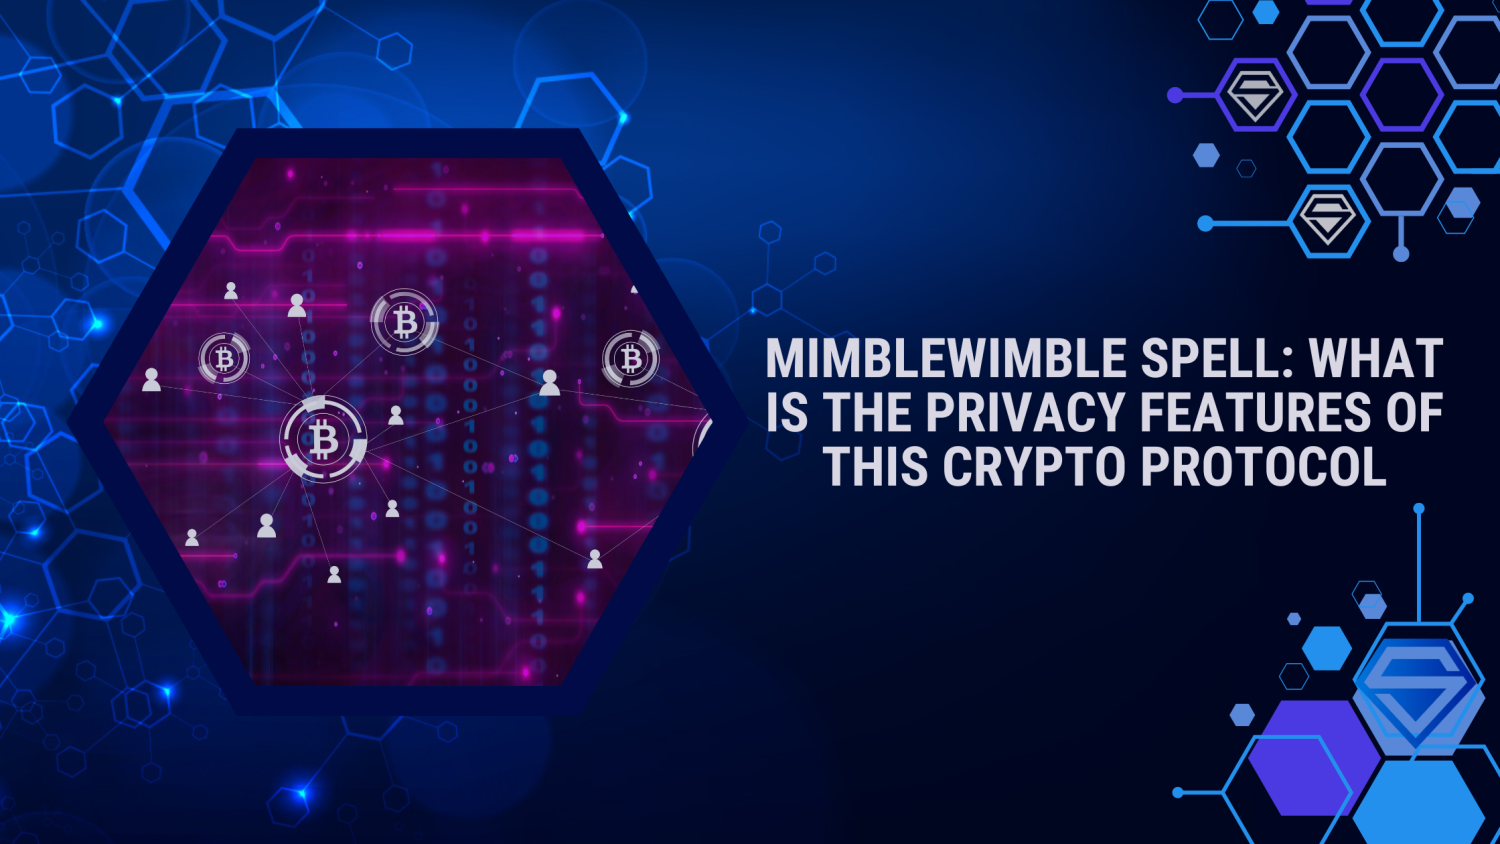 Mimblewimble Spell: What is the Privacy Features of this Crypto Protocol?